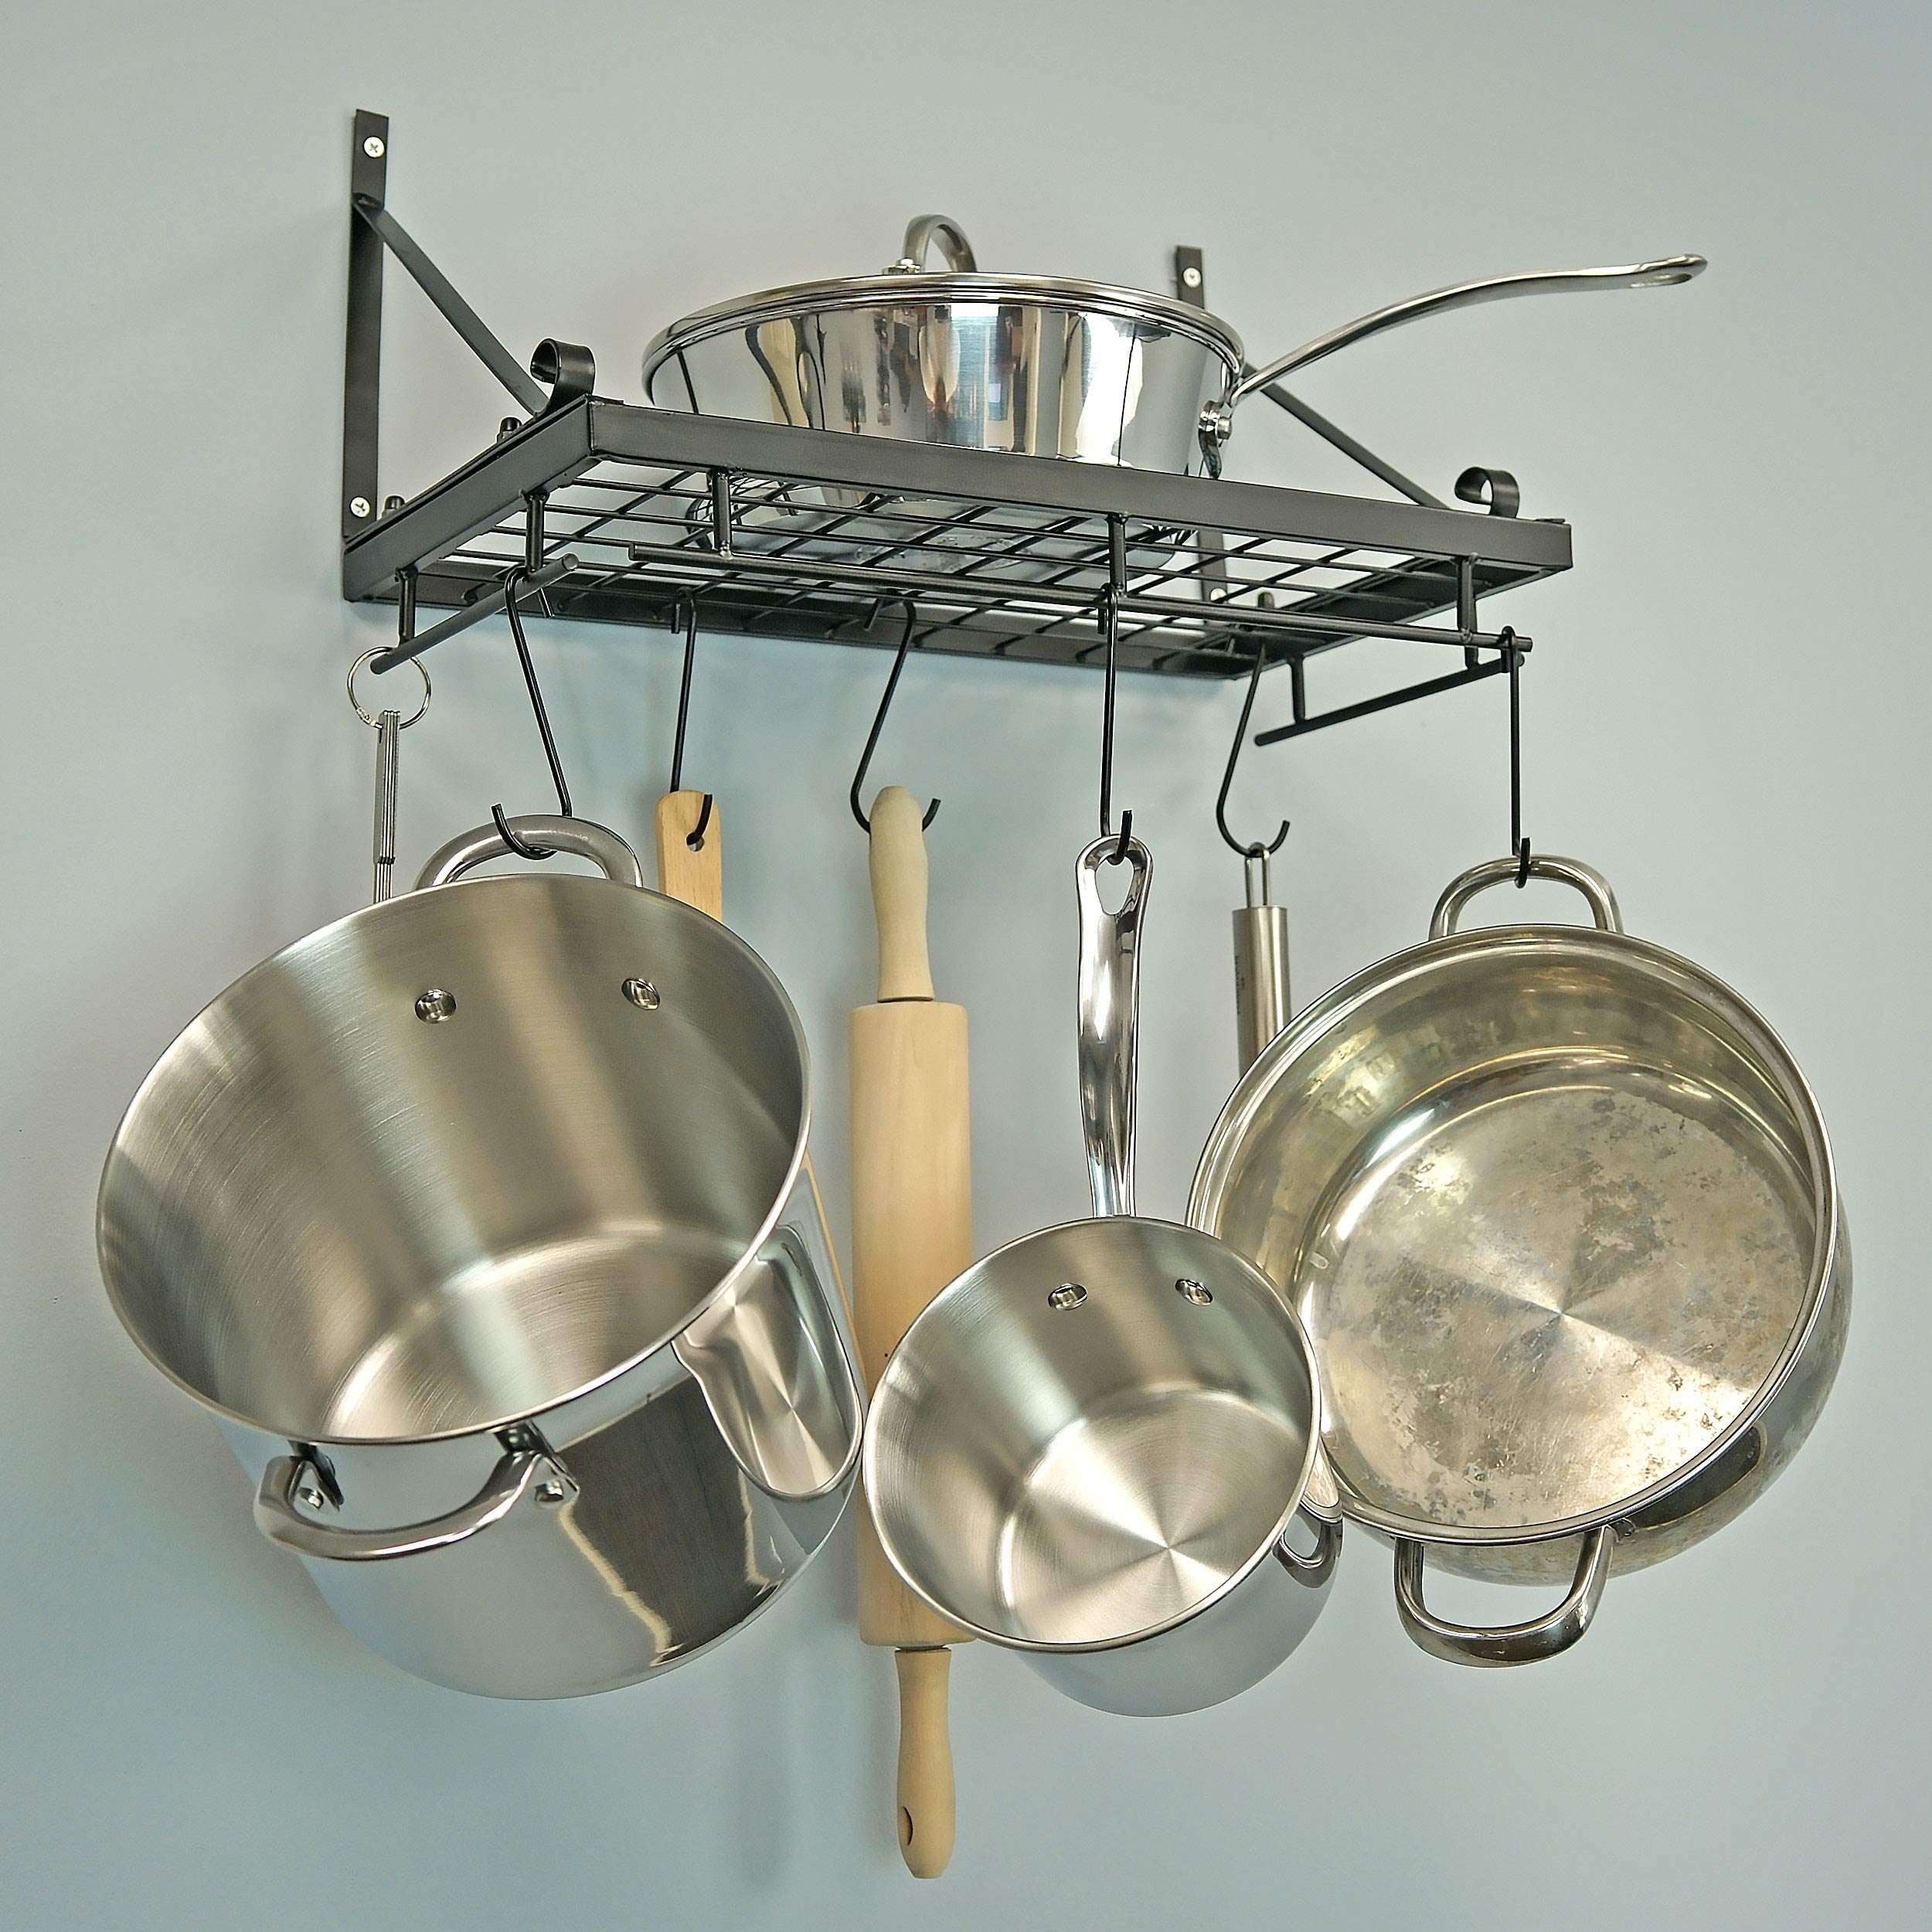 Southern Homewares Classic Pot and Pan Hanging Rack Cast Iron Pans Includes Wire Shelf and 8 Hooks Easy Mount